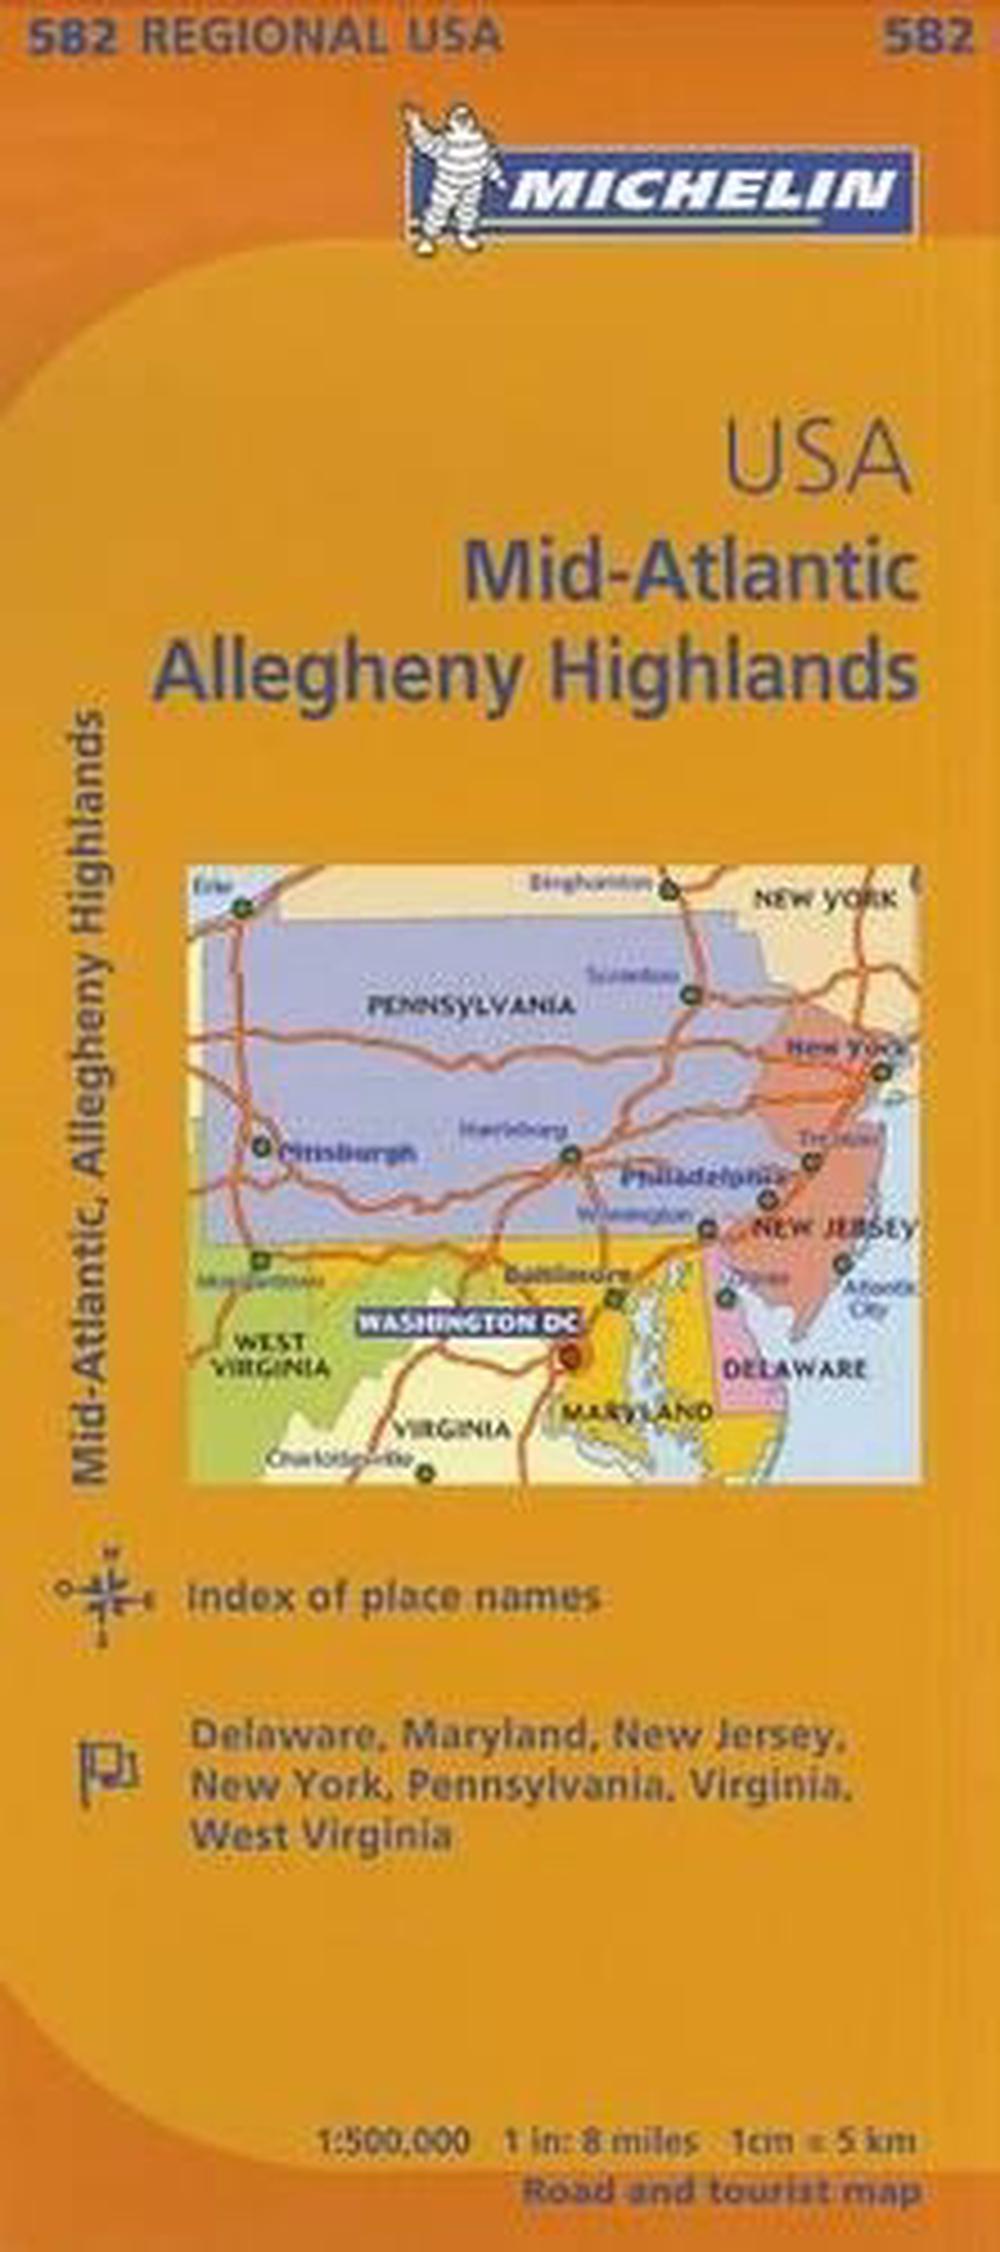 Michelin USA: Mid-Atlantic, Allegheny Highlands Map 582 - Folded Map - image 1 of 1